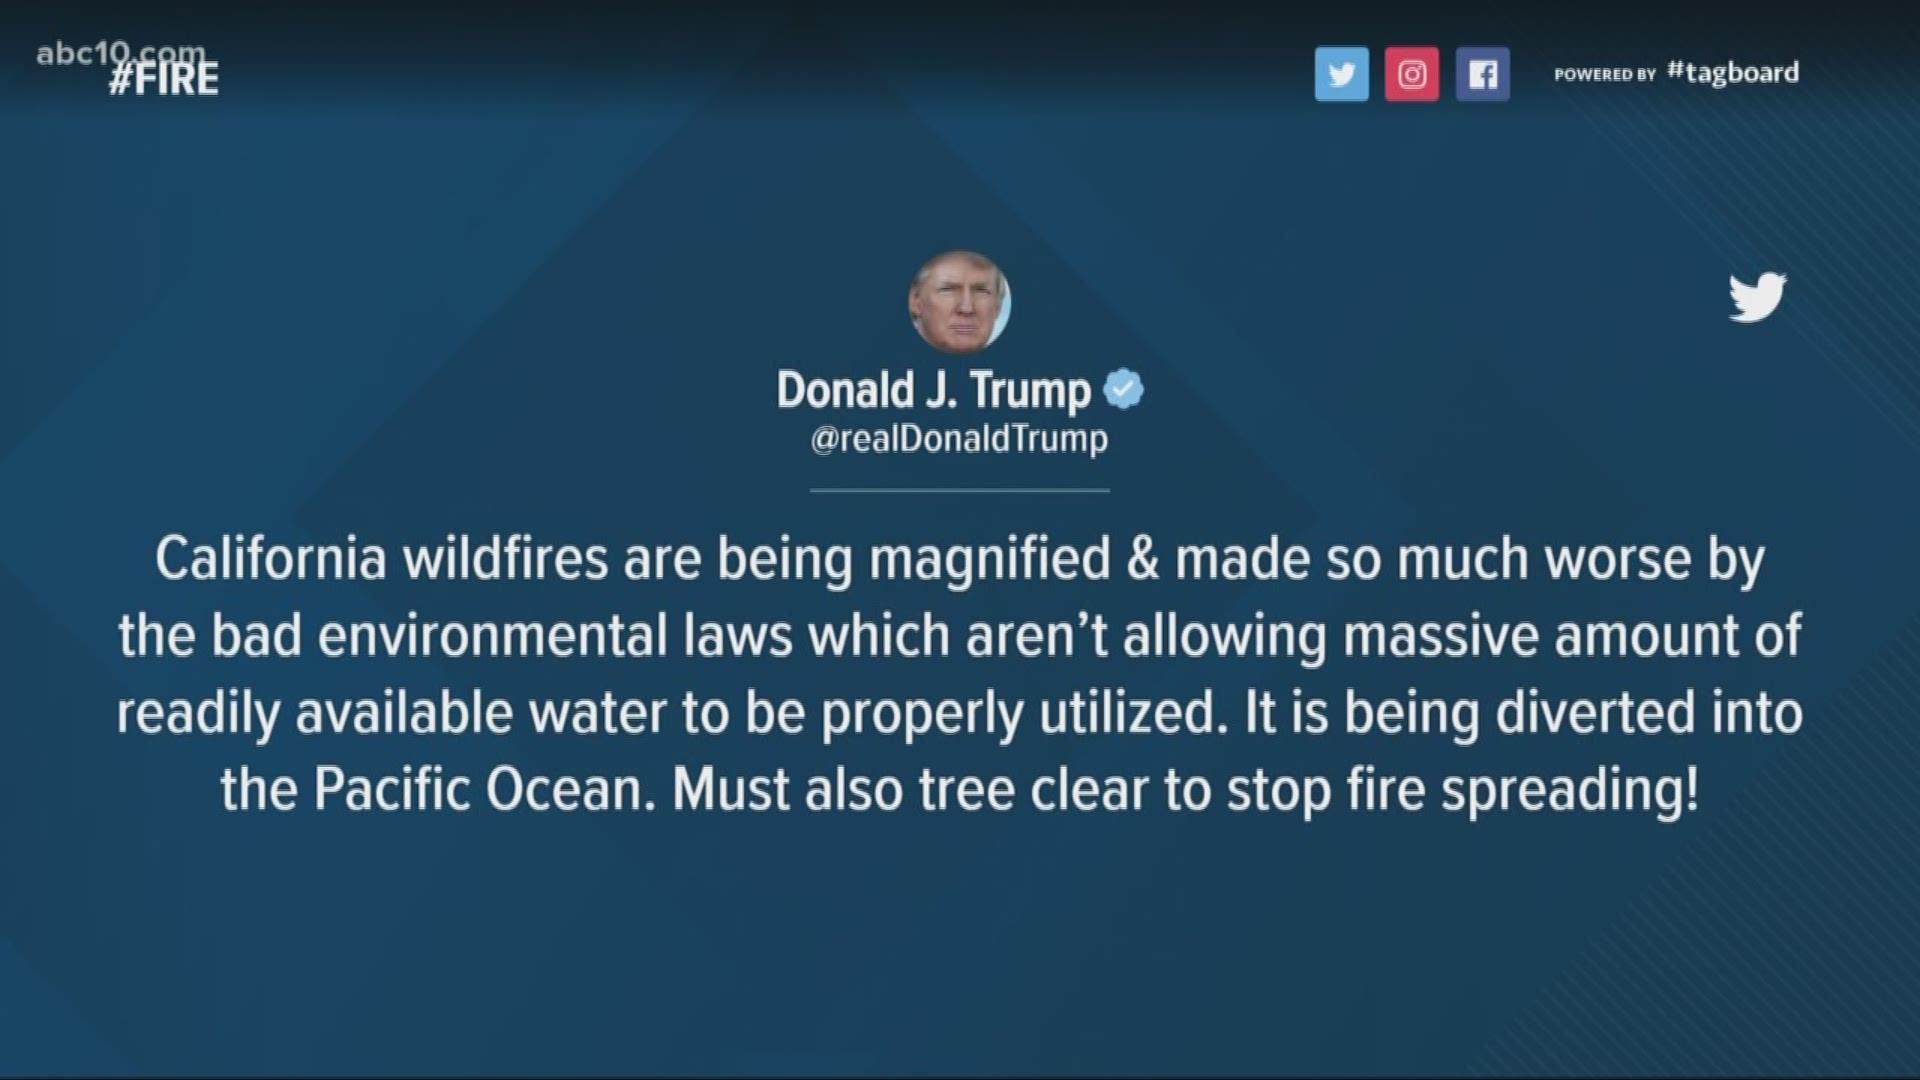 President Donald Trump tweeted Sunday that the wildfires hitting California are "being magnified & made so much worse by the bad environmental laws which aren't allowing massive amount of readily available water to be properly utilized."